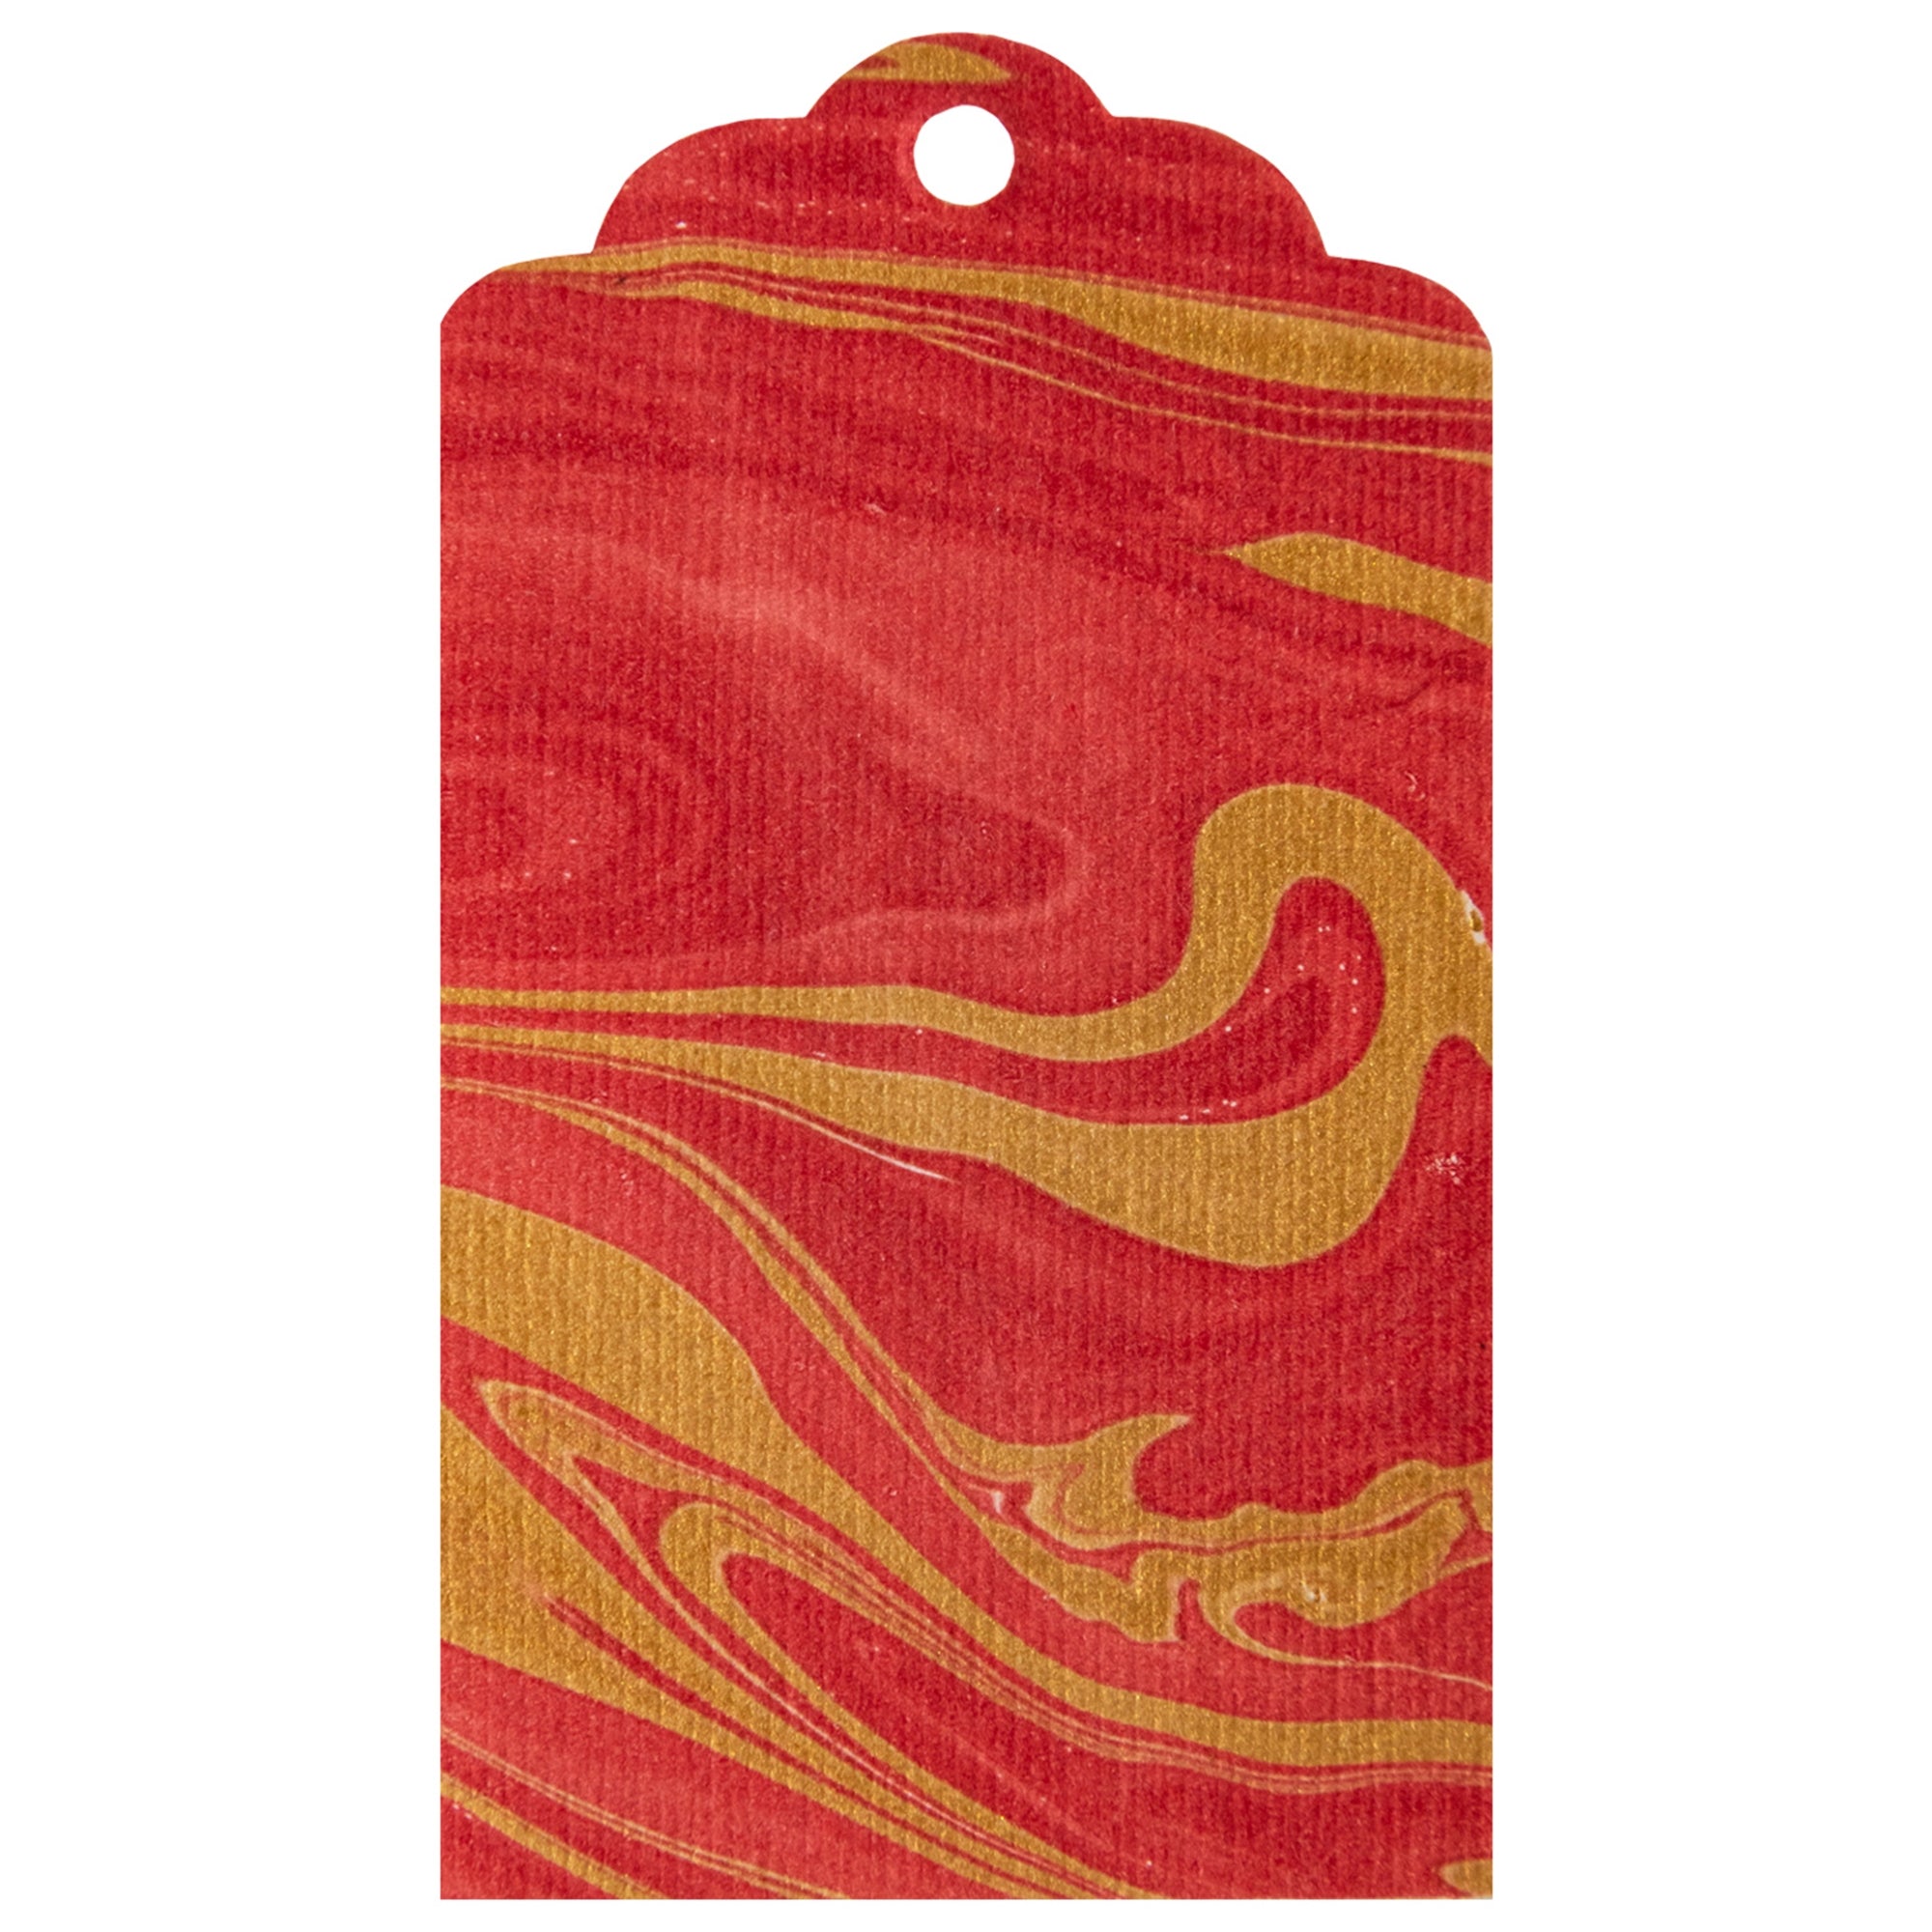 Hester & Cook Red & Gold Veined Marbled Placemats & Tags